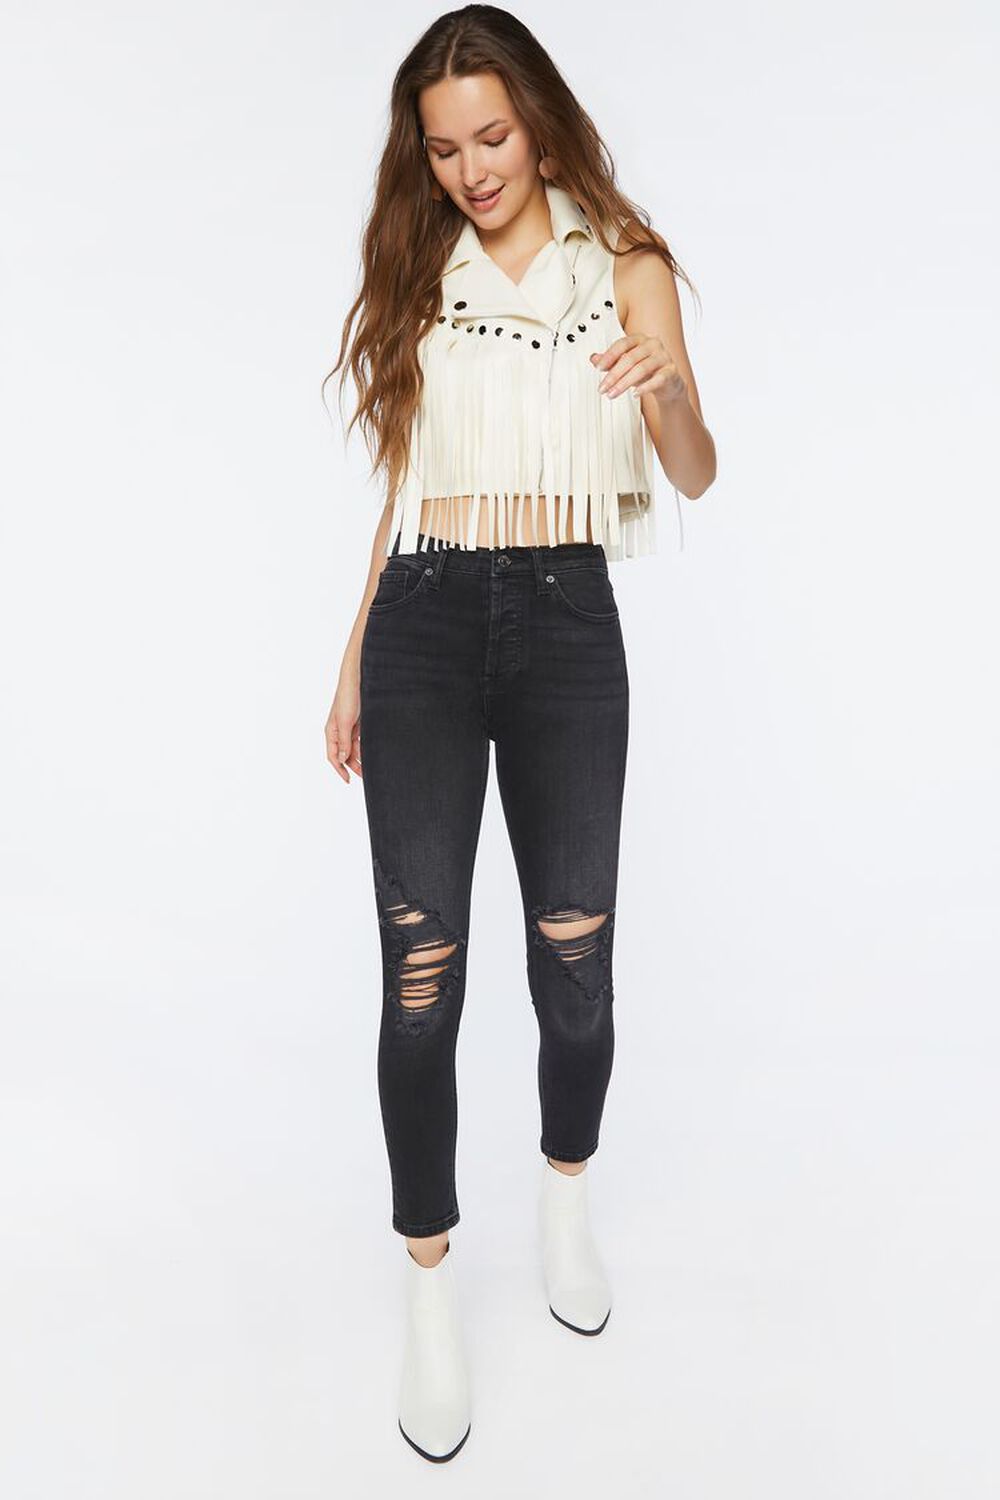 WASHED BLACK Long Distressed High-Rise Jeans, image 1